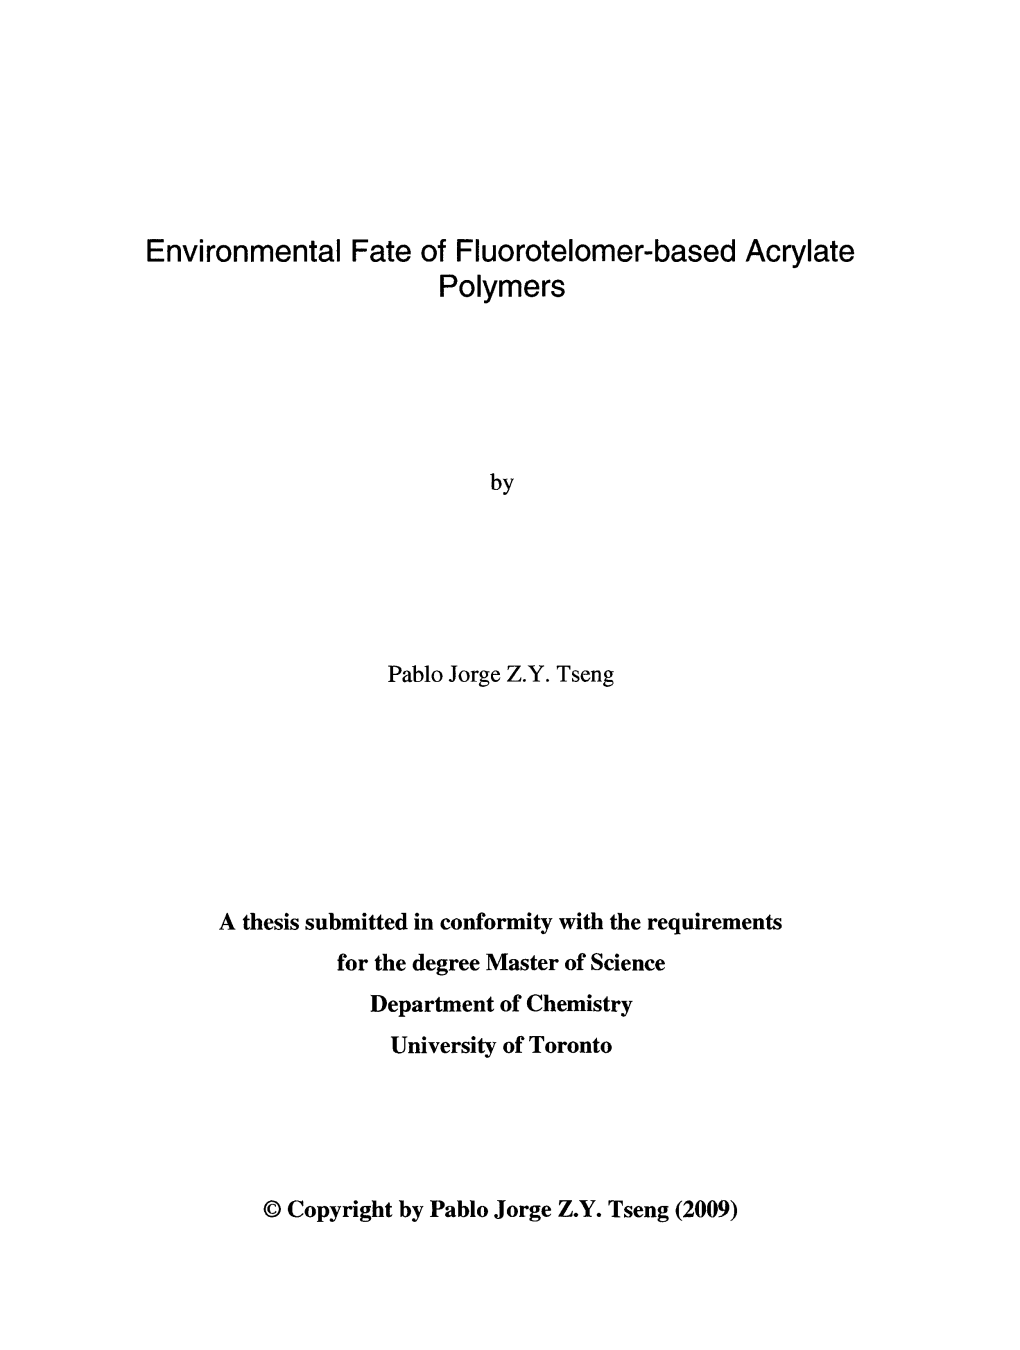 Environmental Fate of Fluorotelomer-Based Acrylate Polymers